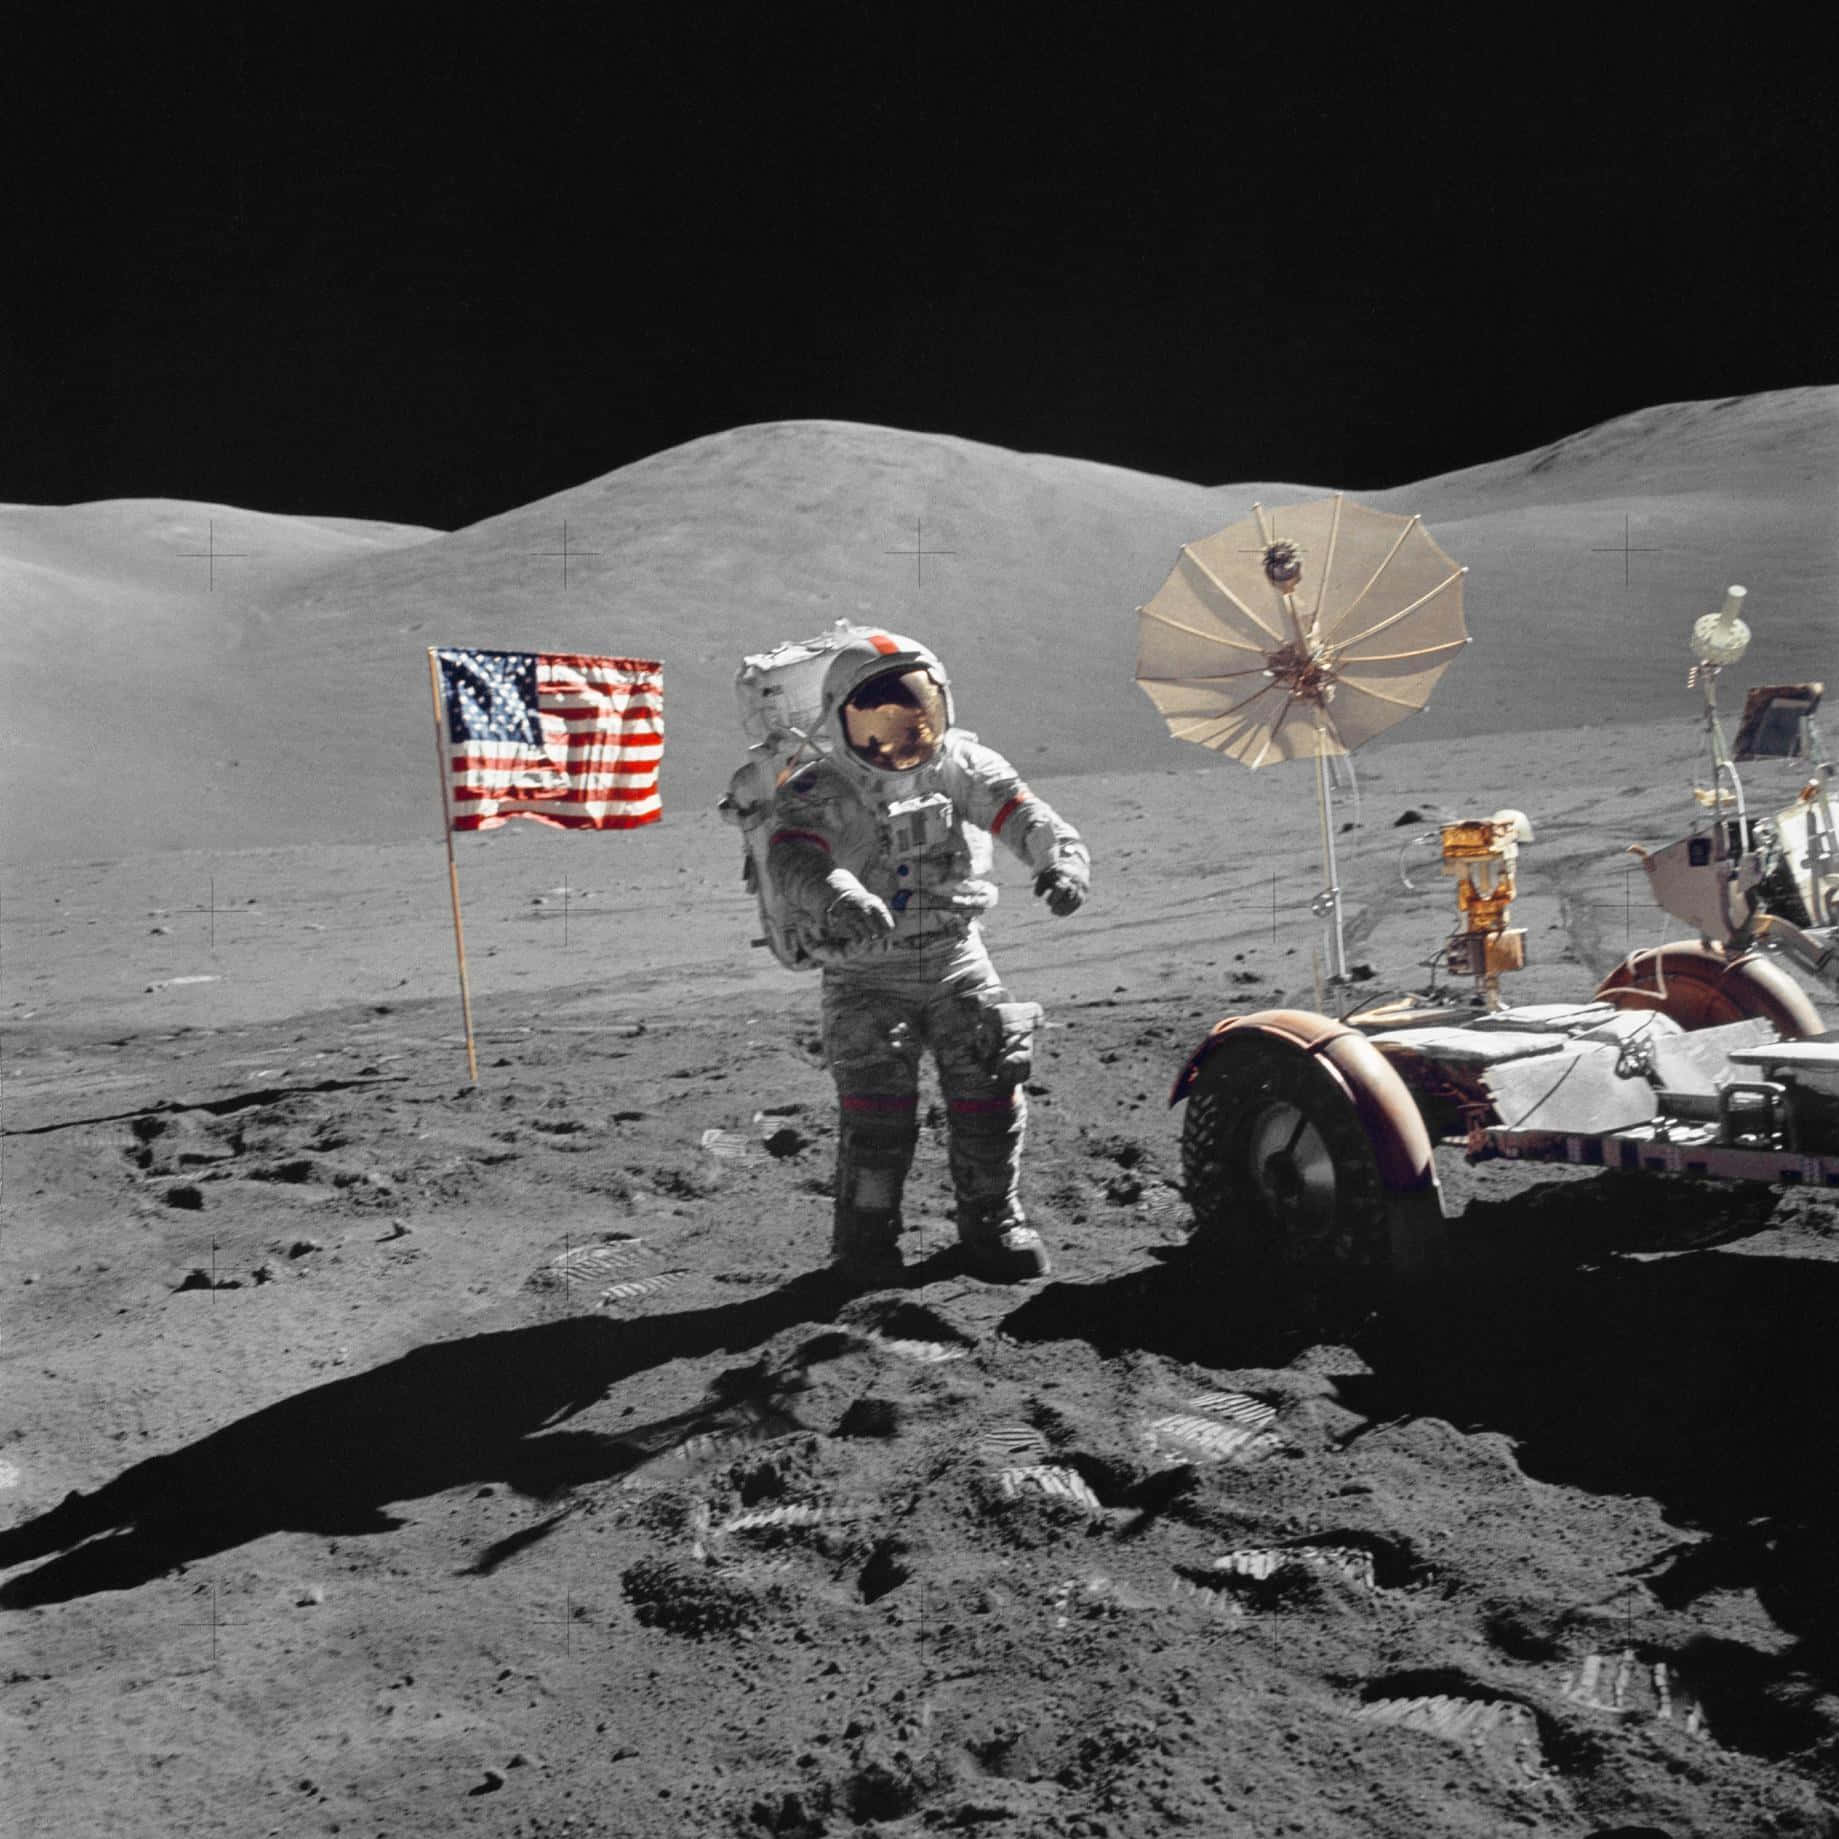 A Man Standing Next To A Rover On The Moon